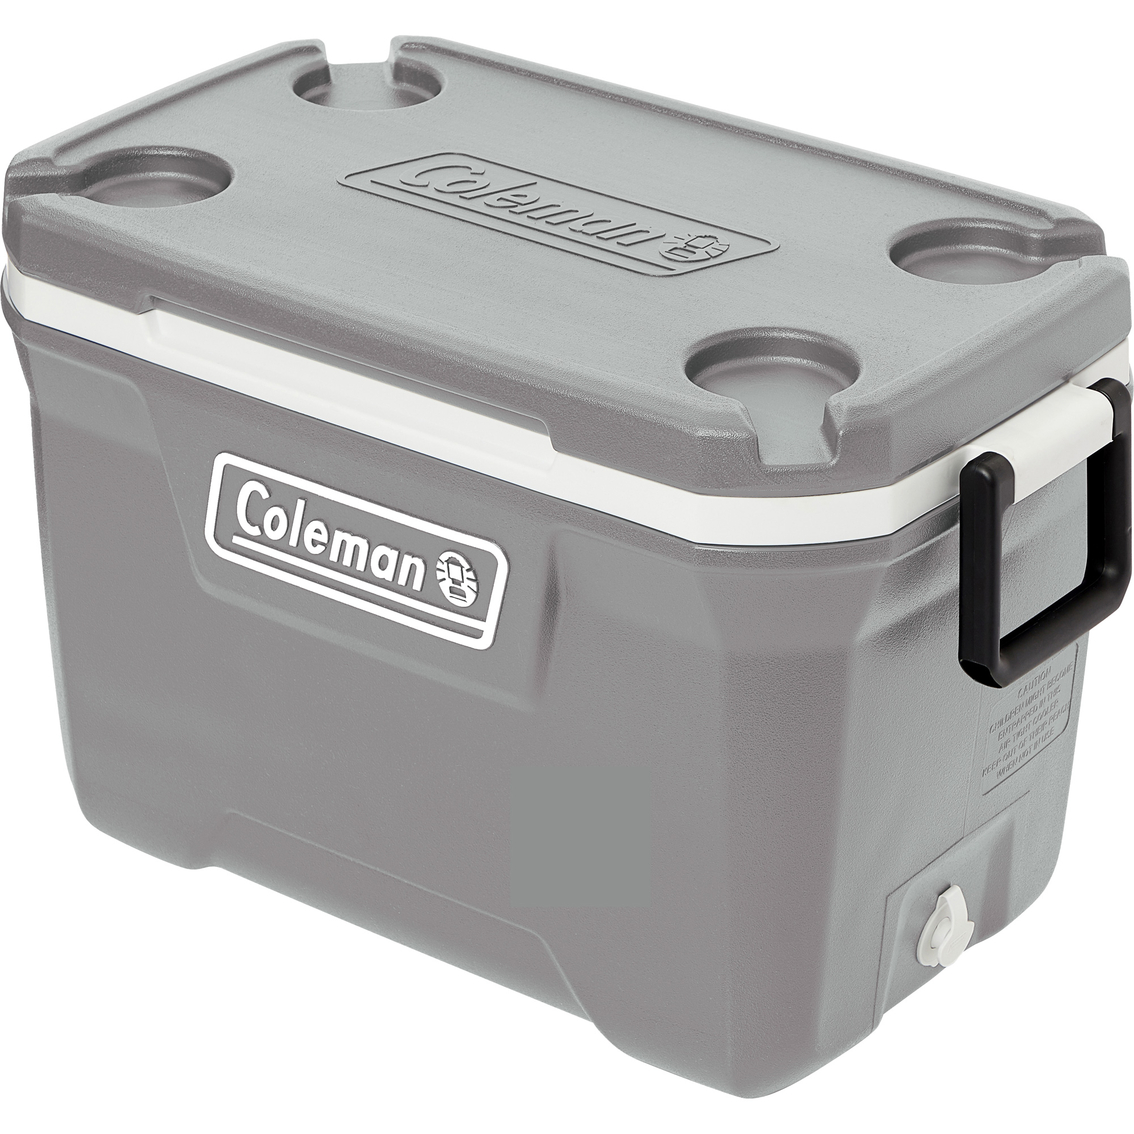 Coleman® 52 qt. Hard Ice Chest Cooler - Image 4 of 8